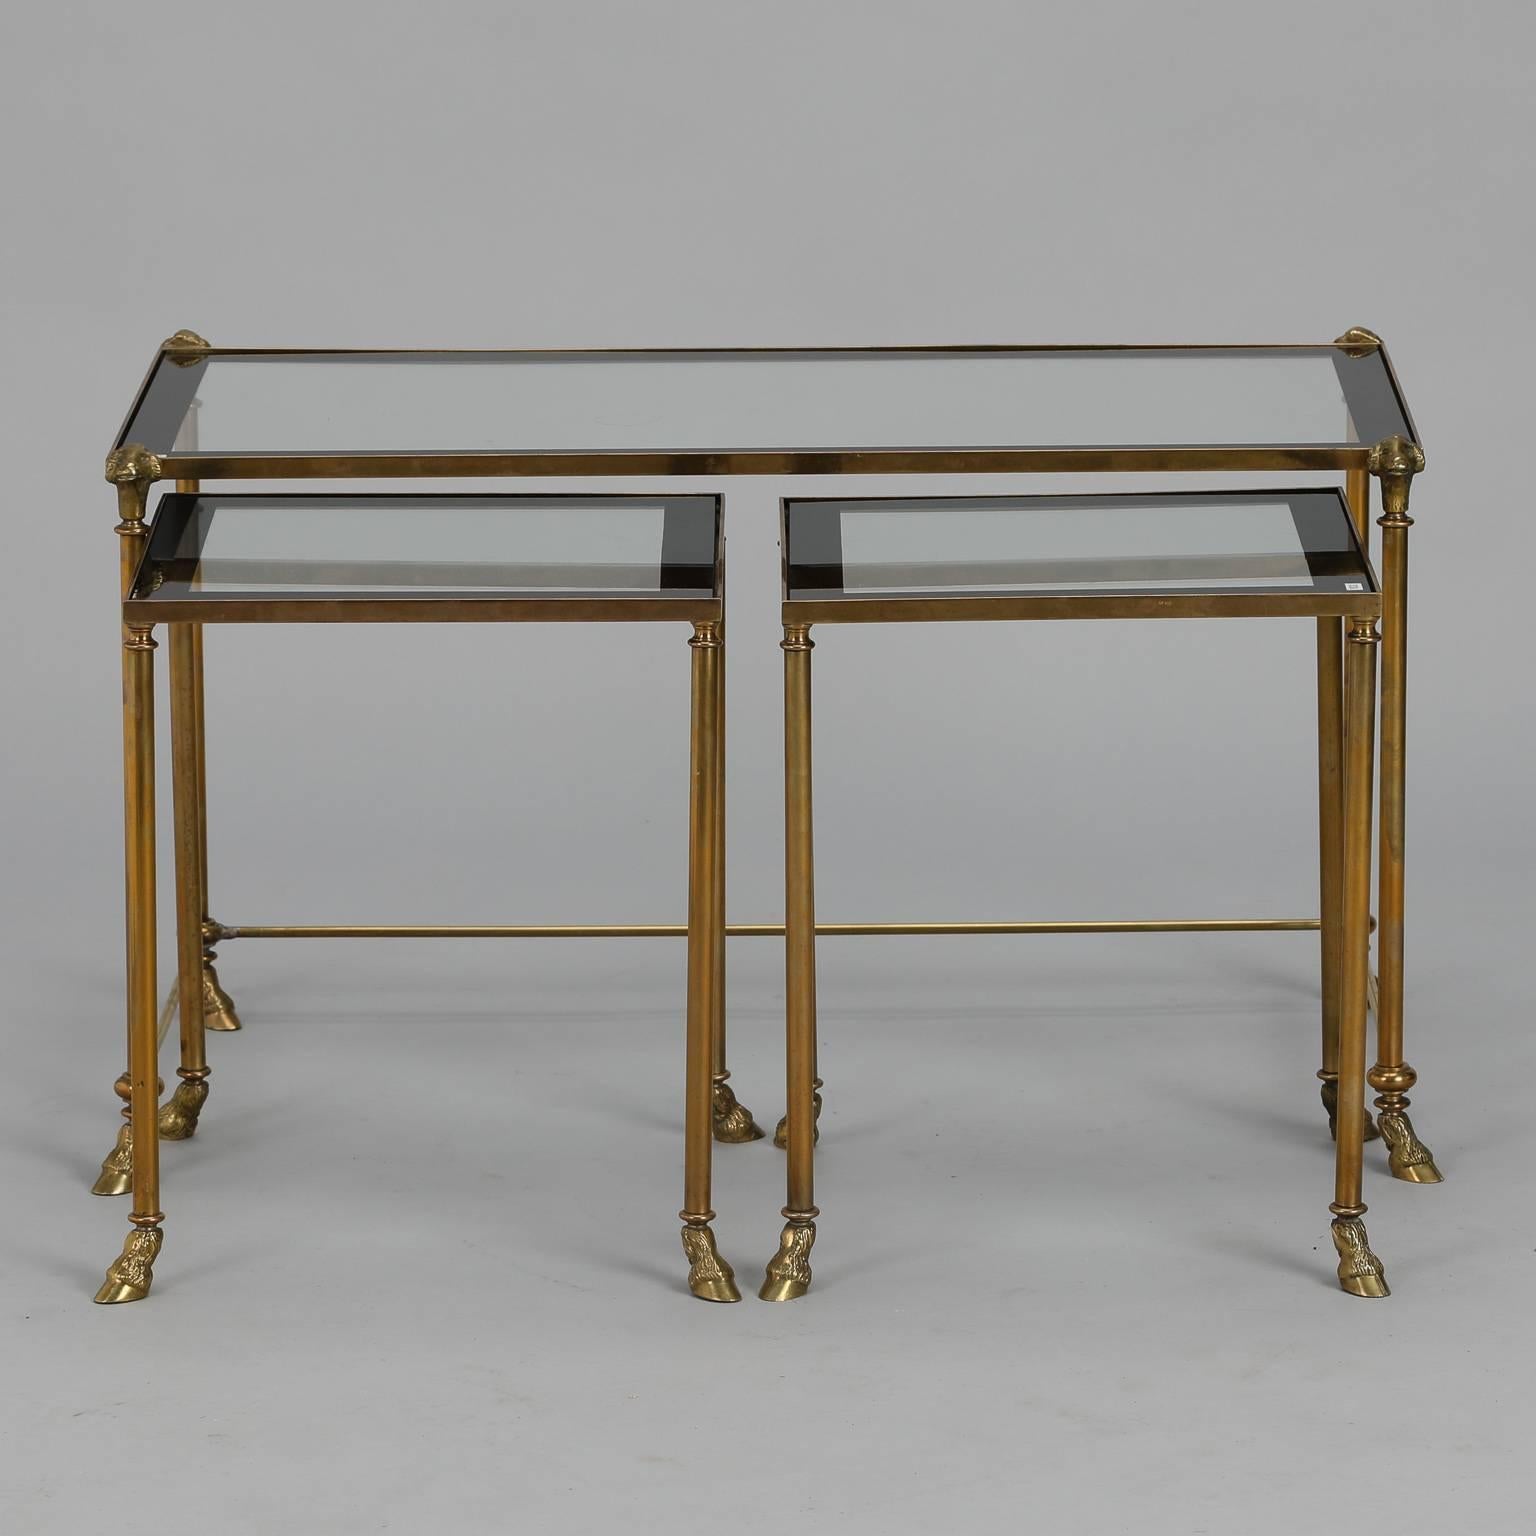 Neoclassical Trio Brass and Glass Ram's Head and Hoof Feet Nesting Tables